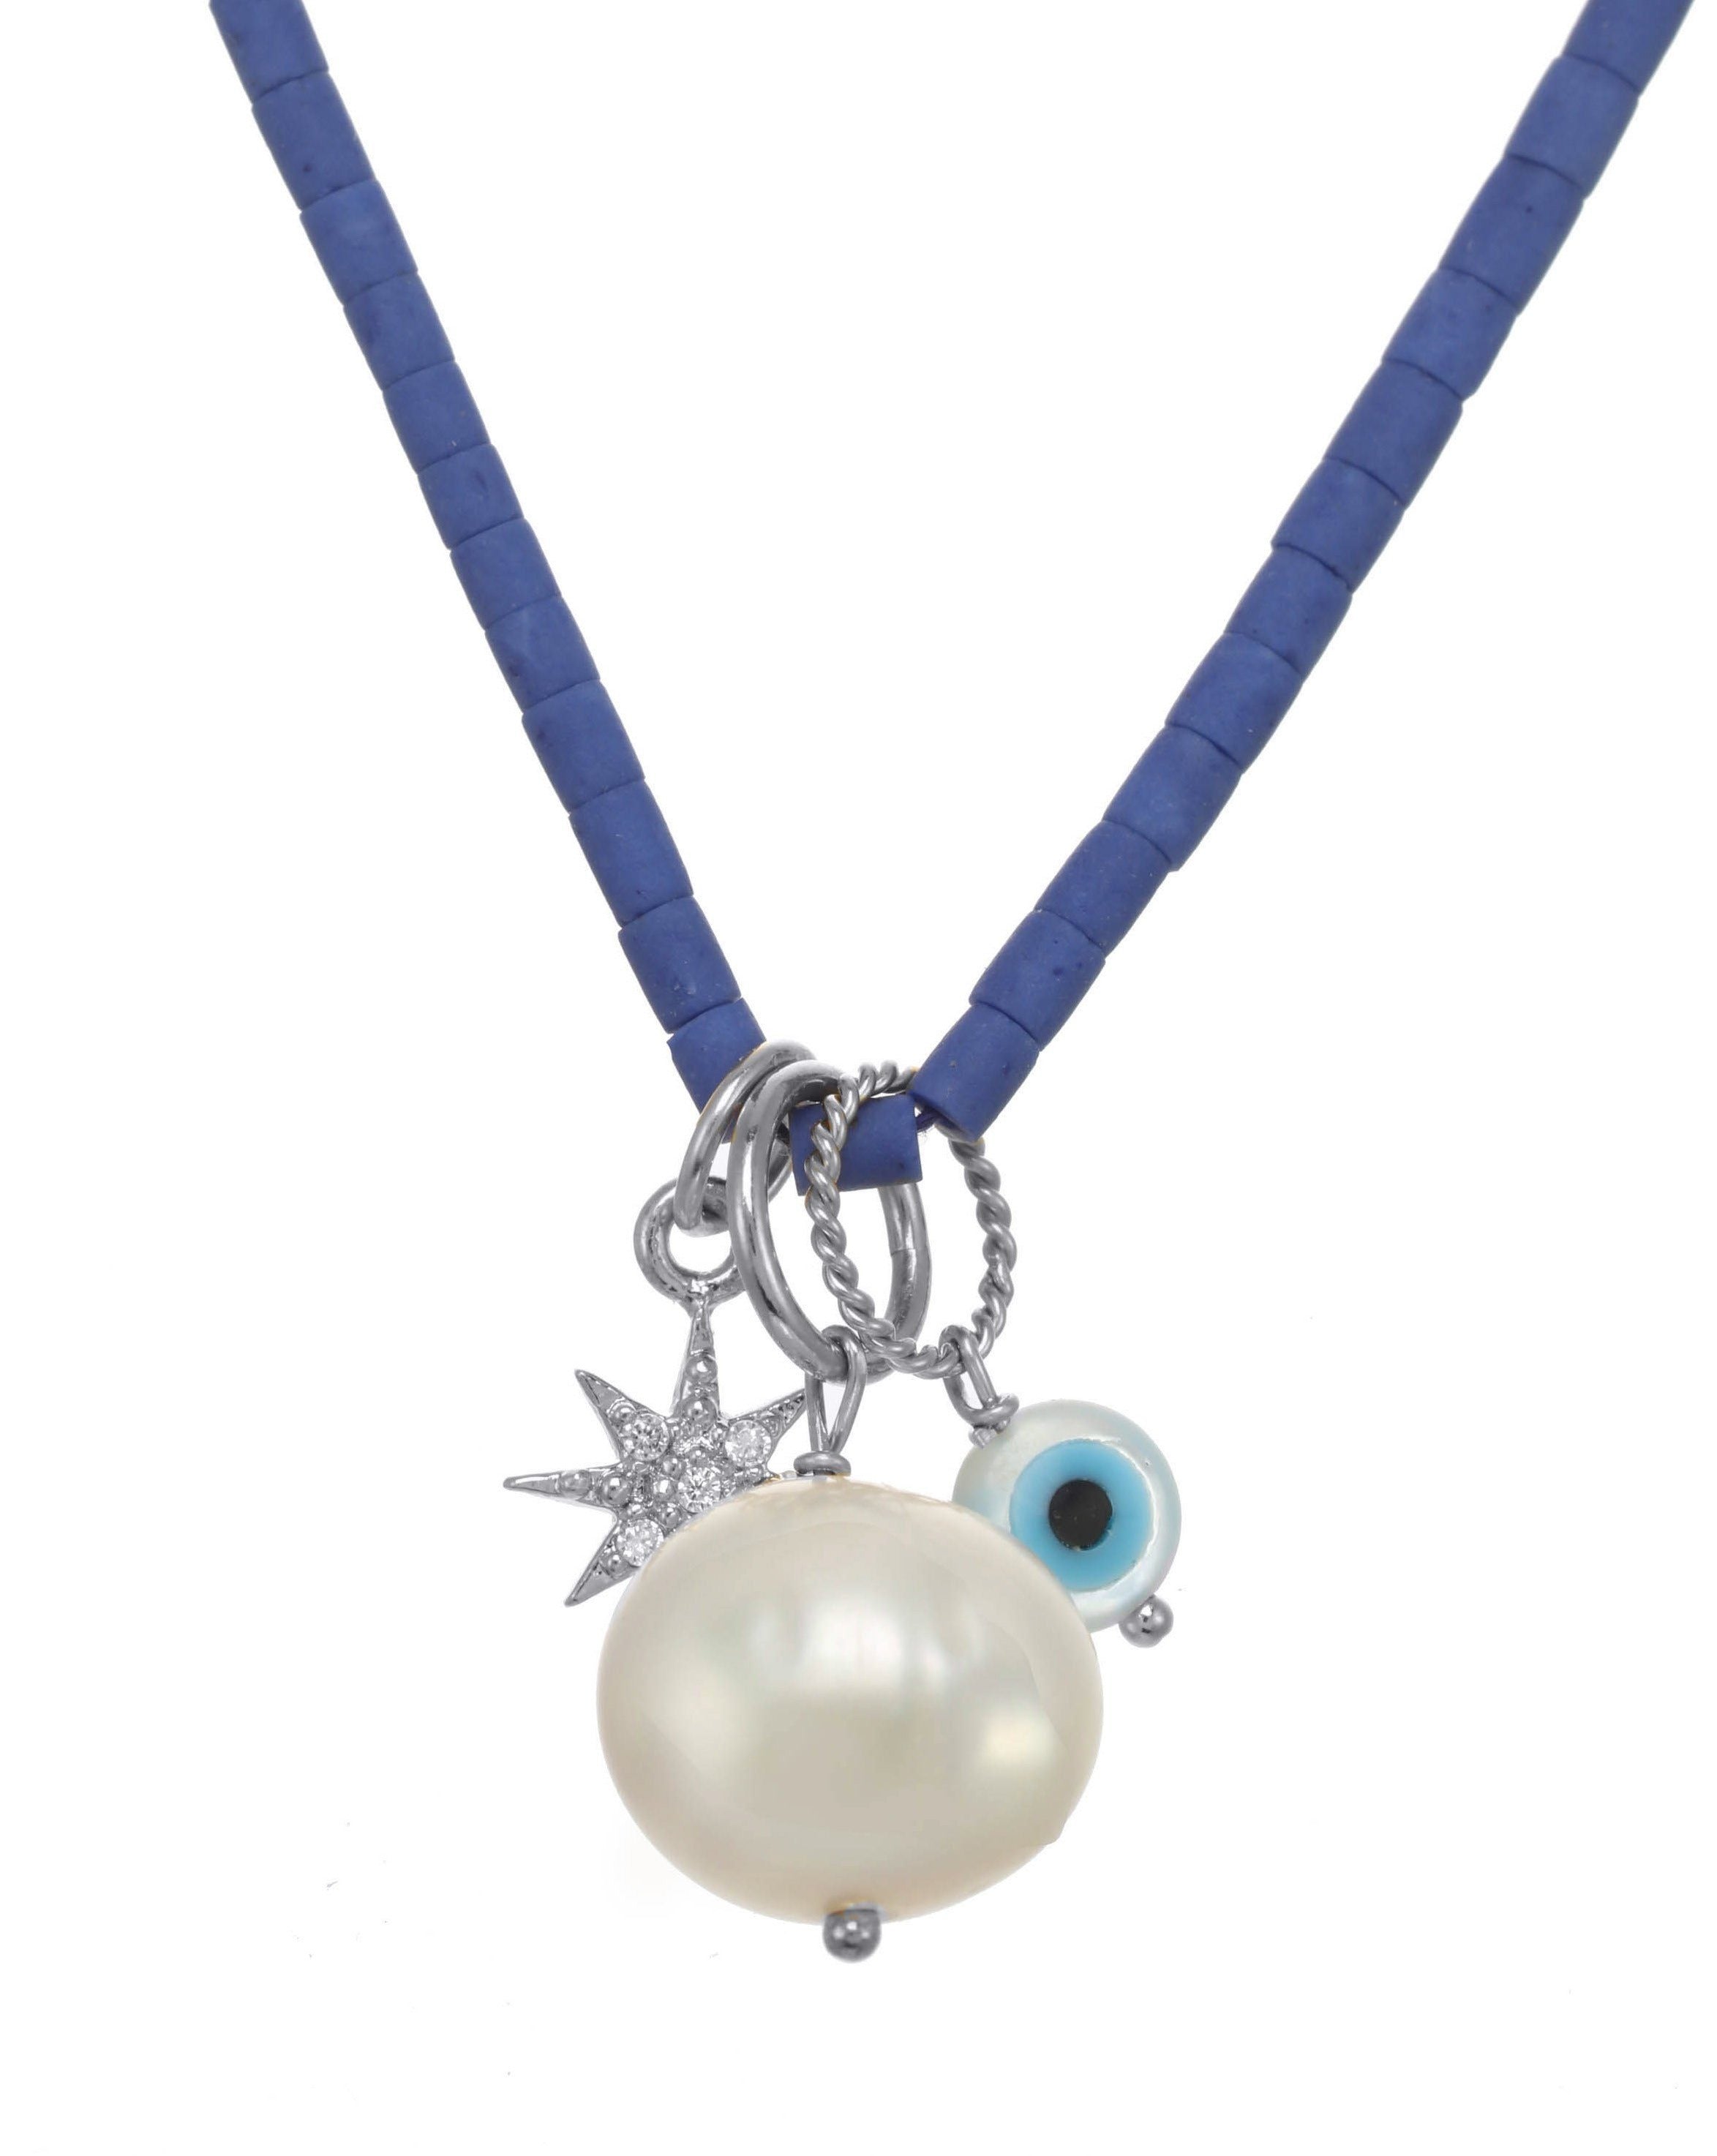 Brook Dark Blue Necklace by KOZAKH. A 13 to 16 inch adjustable length colored Afghan Beads strand necklace in Sterling Silver, featuring a hand carved Mother of Pearl evil eye charm, a round Freshwater Pearl, and a Cubic Zirconia encrusted star charm.